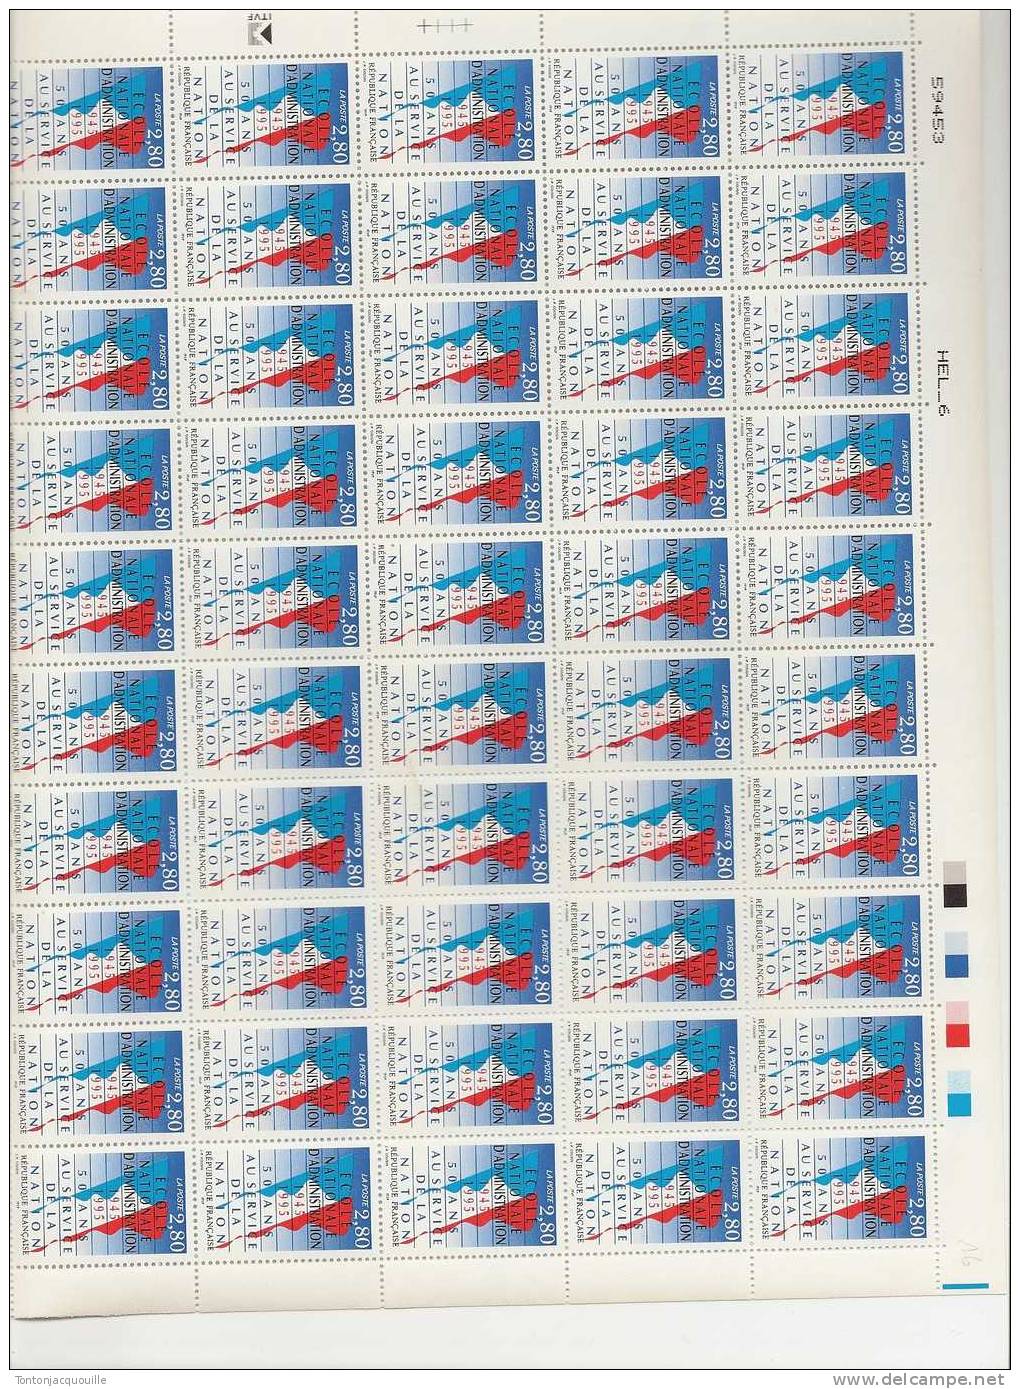 ECOLE NATIONALE D'ADMINISTRATION  1945-1995  ++   FEUILLE DE 50 TIMBRES  A  2,80 - Full Sheets